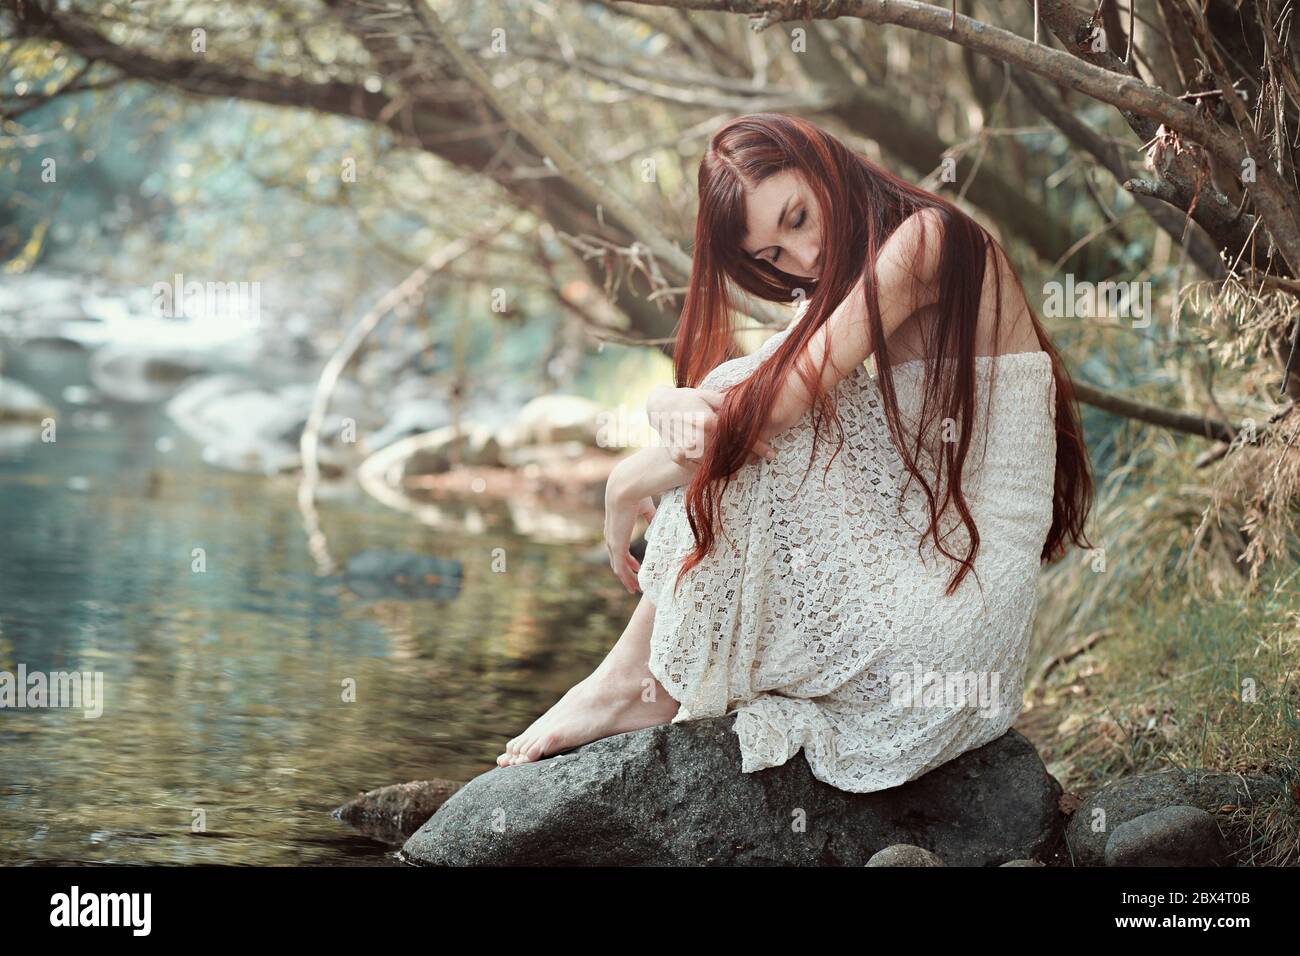 Woman lost in beautiful dreams . Purity and innocence concept Stock Photo